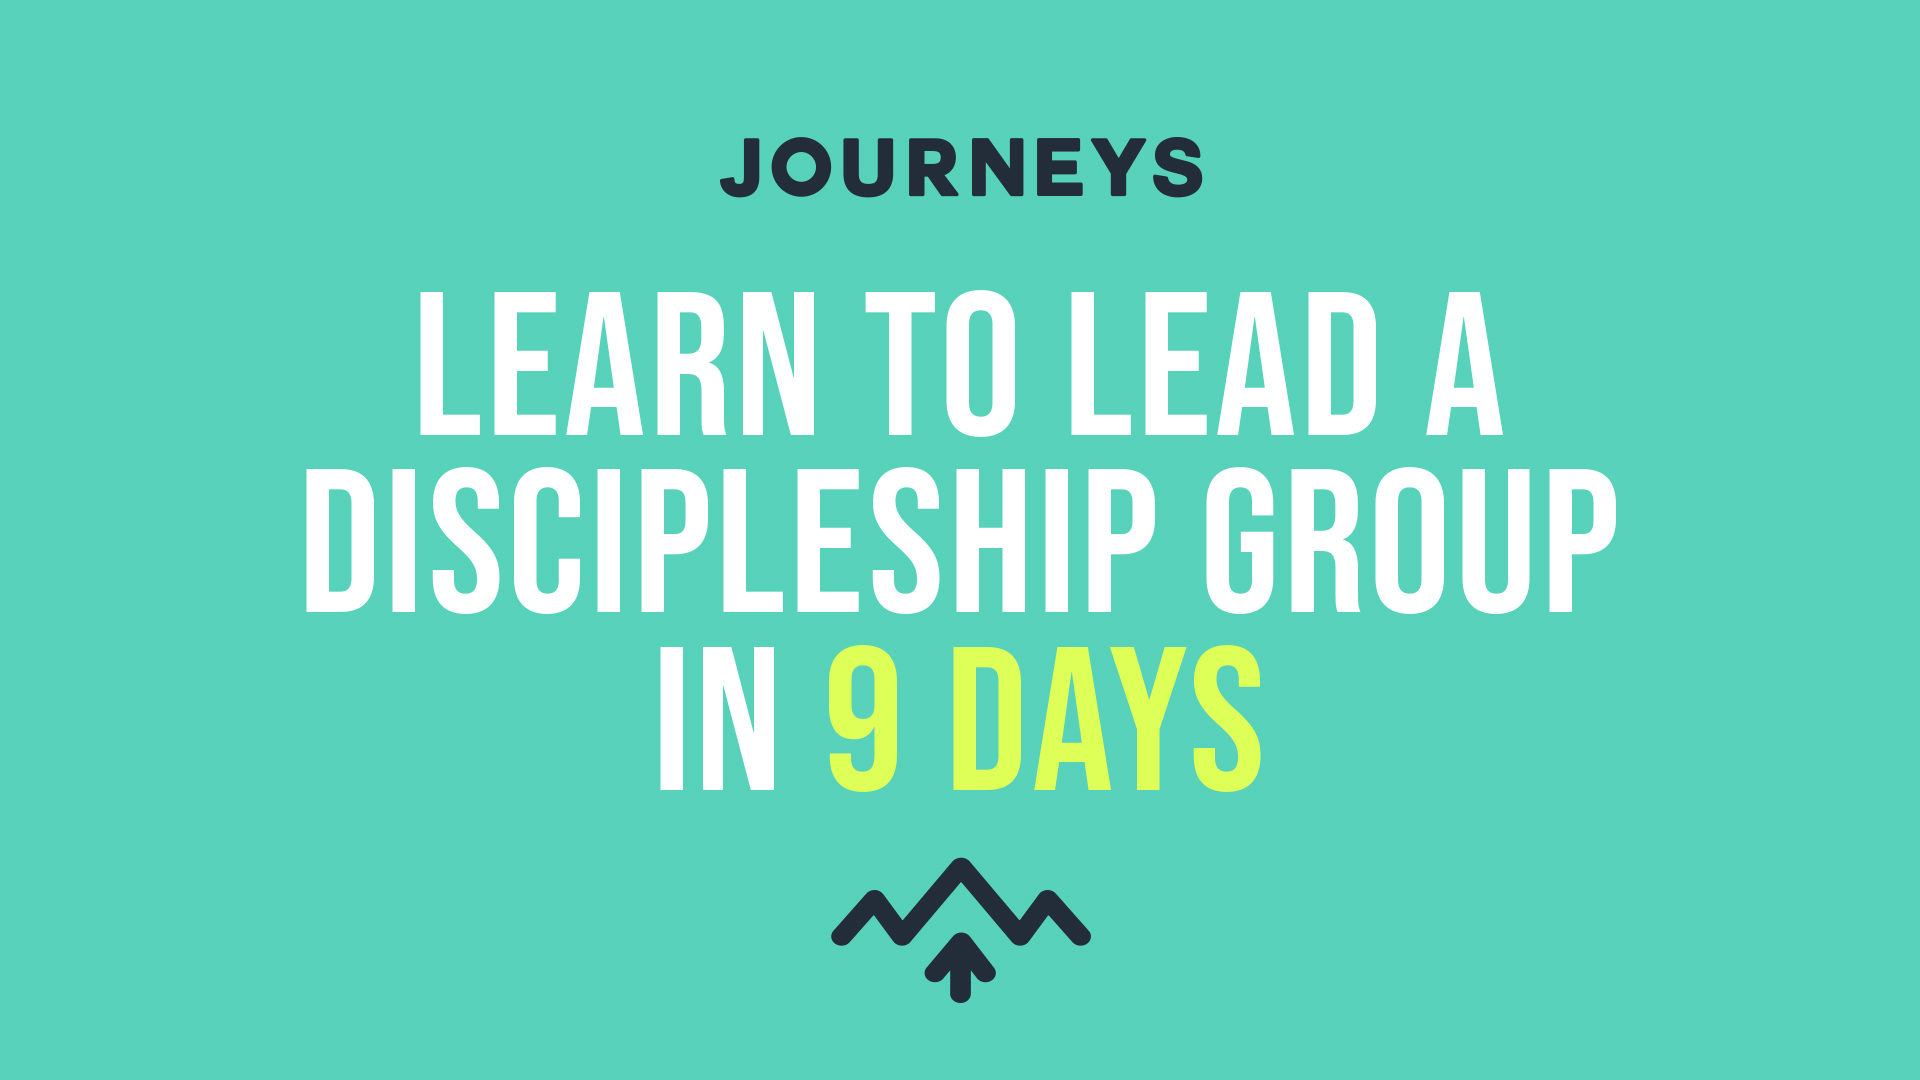 Learn to Lead a Discipleship Group in 9 Days